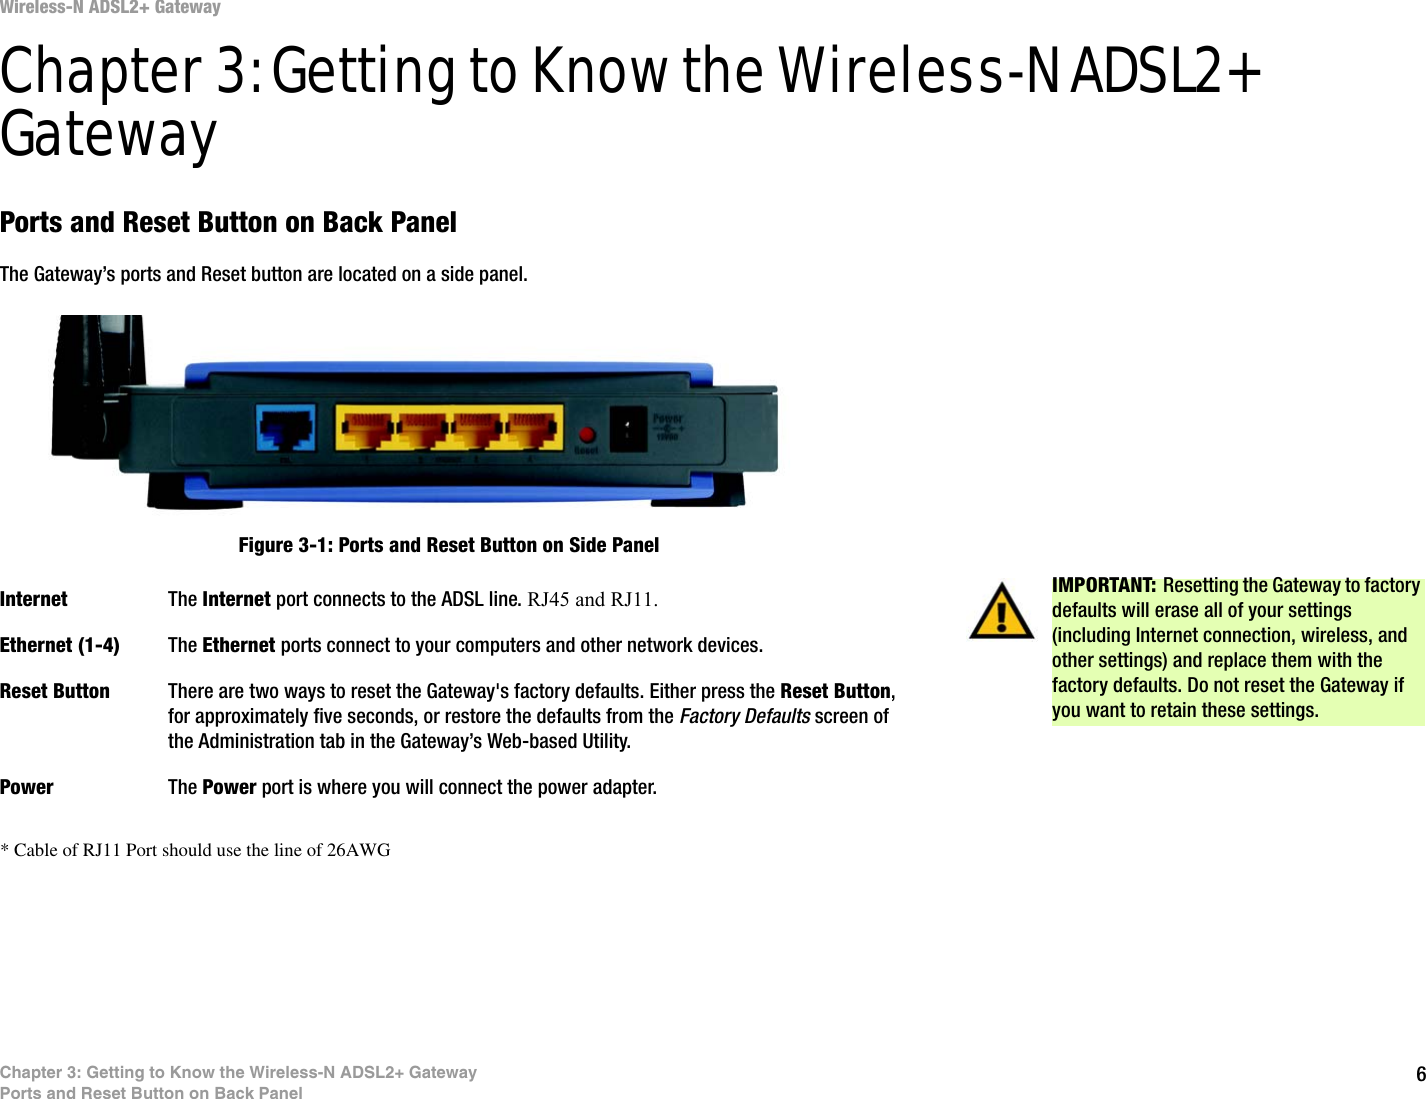 6Chapter 3: Getting to Know the Wireless-N ADSL2+ GatewayPorts and Reset Button on Back PanelWireless-N ADSL2+ GatewayChapter 3: Getting to Know the Wireless-N ADSL2+ GatewayPorts and Reset Button on Back PanelThe Gateway’s ports and Reset button are located on a side panel.Internet The Internet port connects to the ADSL line. RJ45 and RJ11.Ethernet (1-4) The Ethernet ports connect to your computers and other network devices.Reset Button There are two ways to reset the Gateway&apos;s factory defaults. Either press the Reset Button, for approximately five seconds, or restore the defaults from the Factory Defaults screen of the Administration tab in the Gateway’s Web-based Utility.Power The Power port is where you will connect the power adapter.IMPORTANT: Resetting the Gateway to factory defaults will erase all of your settings (including Internet connection, wireless, and other settings) and replace them with the factory defaults. Do not reset the Gateway if you want to retain these settings.Figure 3-1: Ports and Reset Button on Side Panel* Cable of RJ11 Port should use the line of 26AWG 